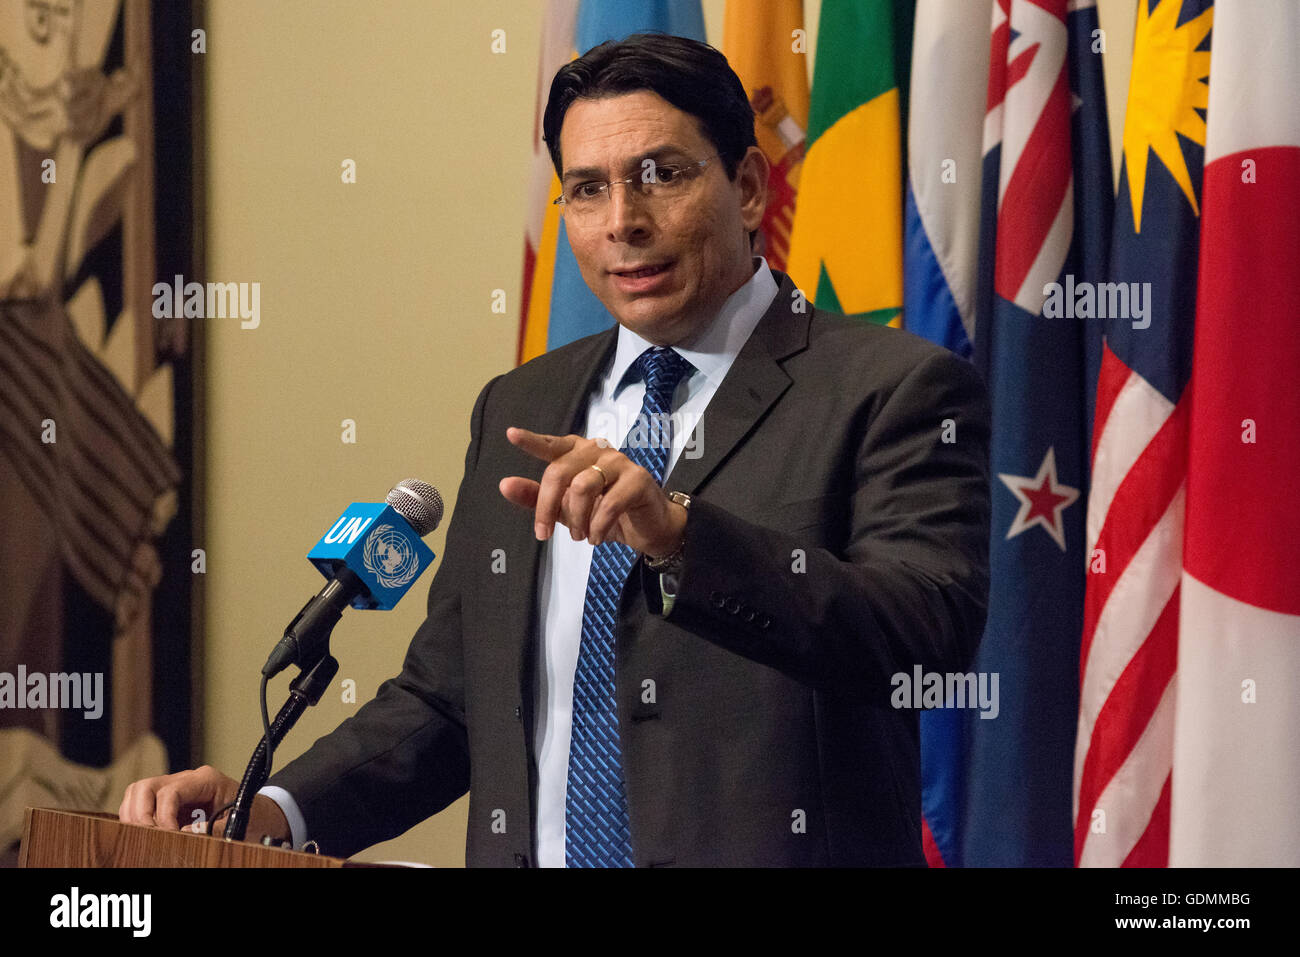 Permanent Representative of Israeli to the United Nations Ambassador Danny Danon speaks to the press at the Security Council stakekout. Before the start of a United Nations Security Council briefing on Iran's compliance with the Joint Comprehensive Plan of Action with regard to its nuclear activities (negotiated July 14, 2015 and implemented on January 16, 2016), Israeli Ambassador to the UN Danny Danon spoke to the press outside the Security Council chamber, reaffirming Israel's contention that Iran remains a key international threat, at UN Headquarters in New York City. (Photo by Albin Lohr- Stock Photo